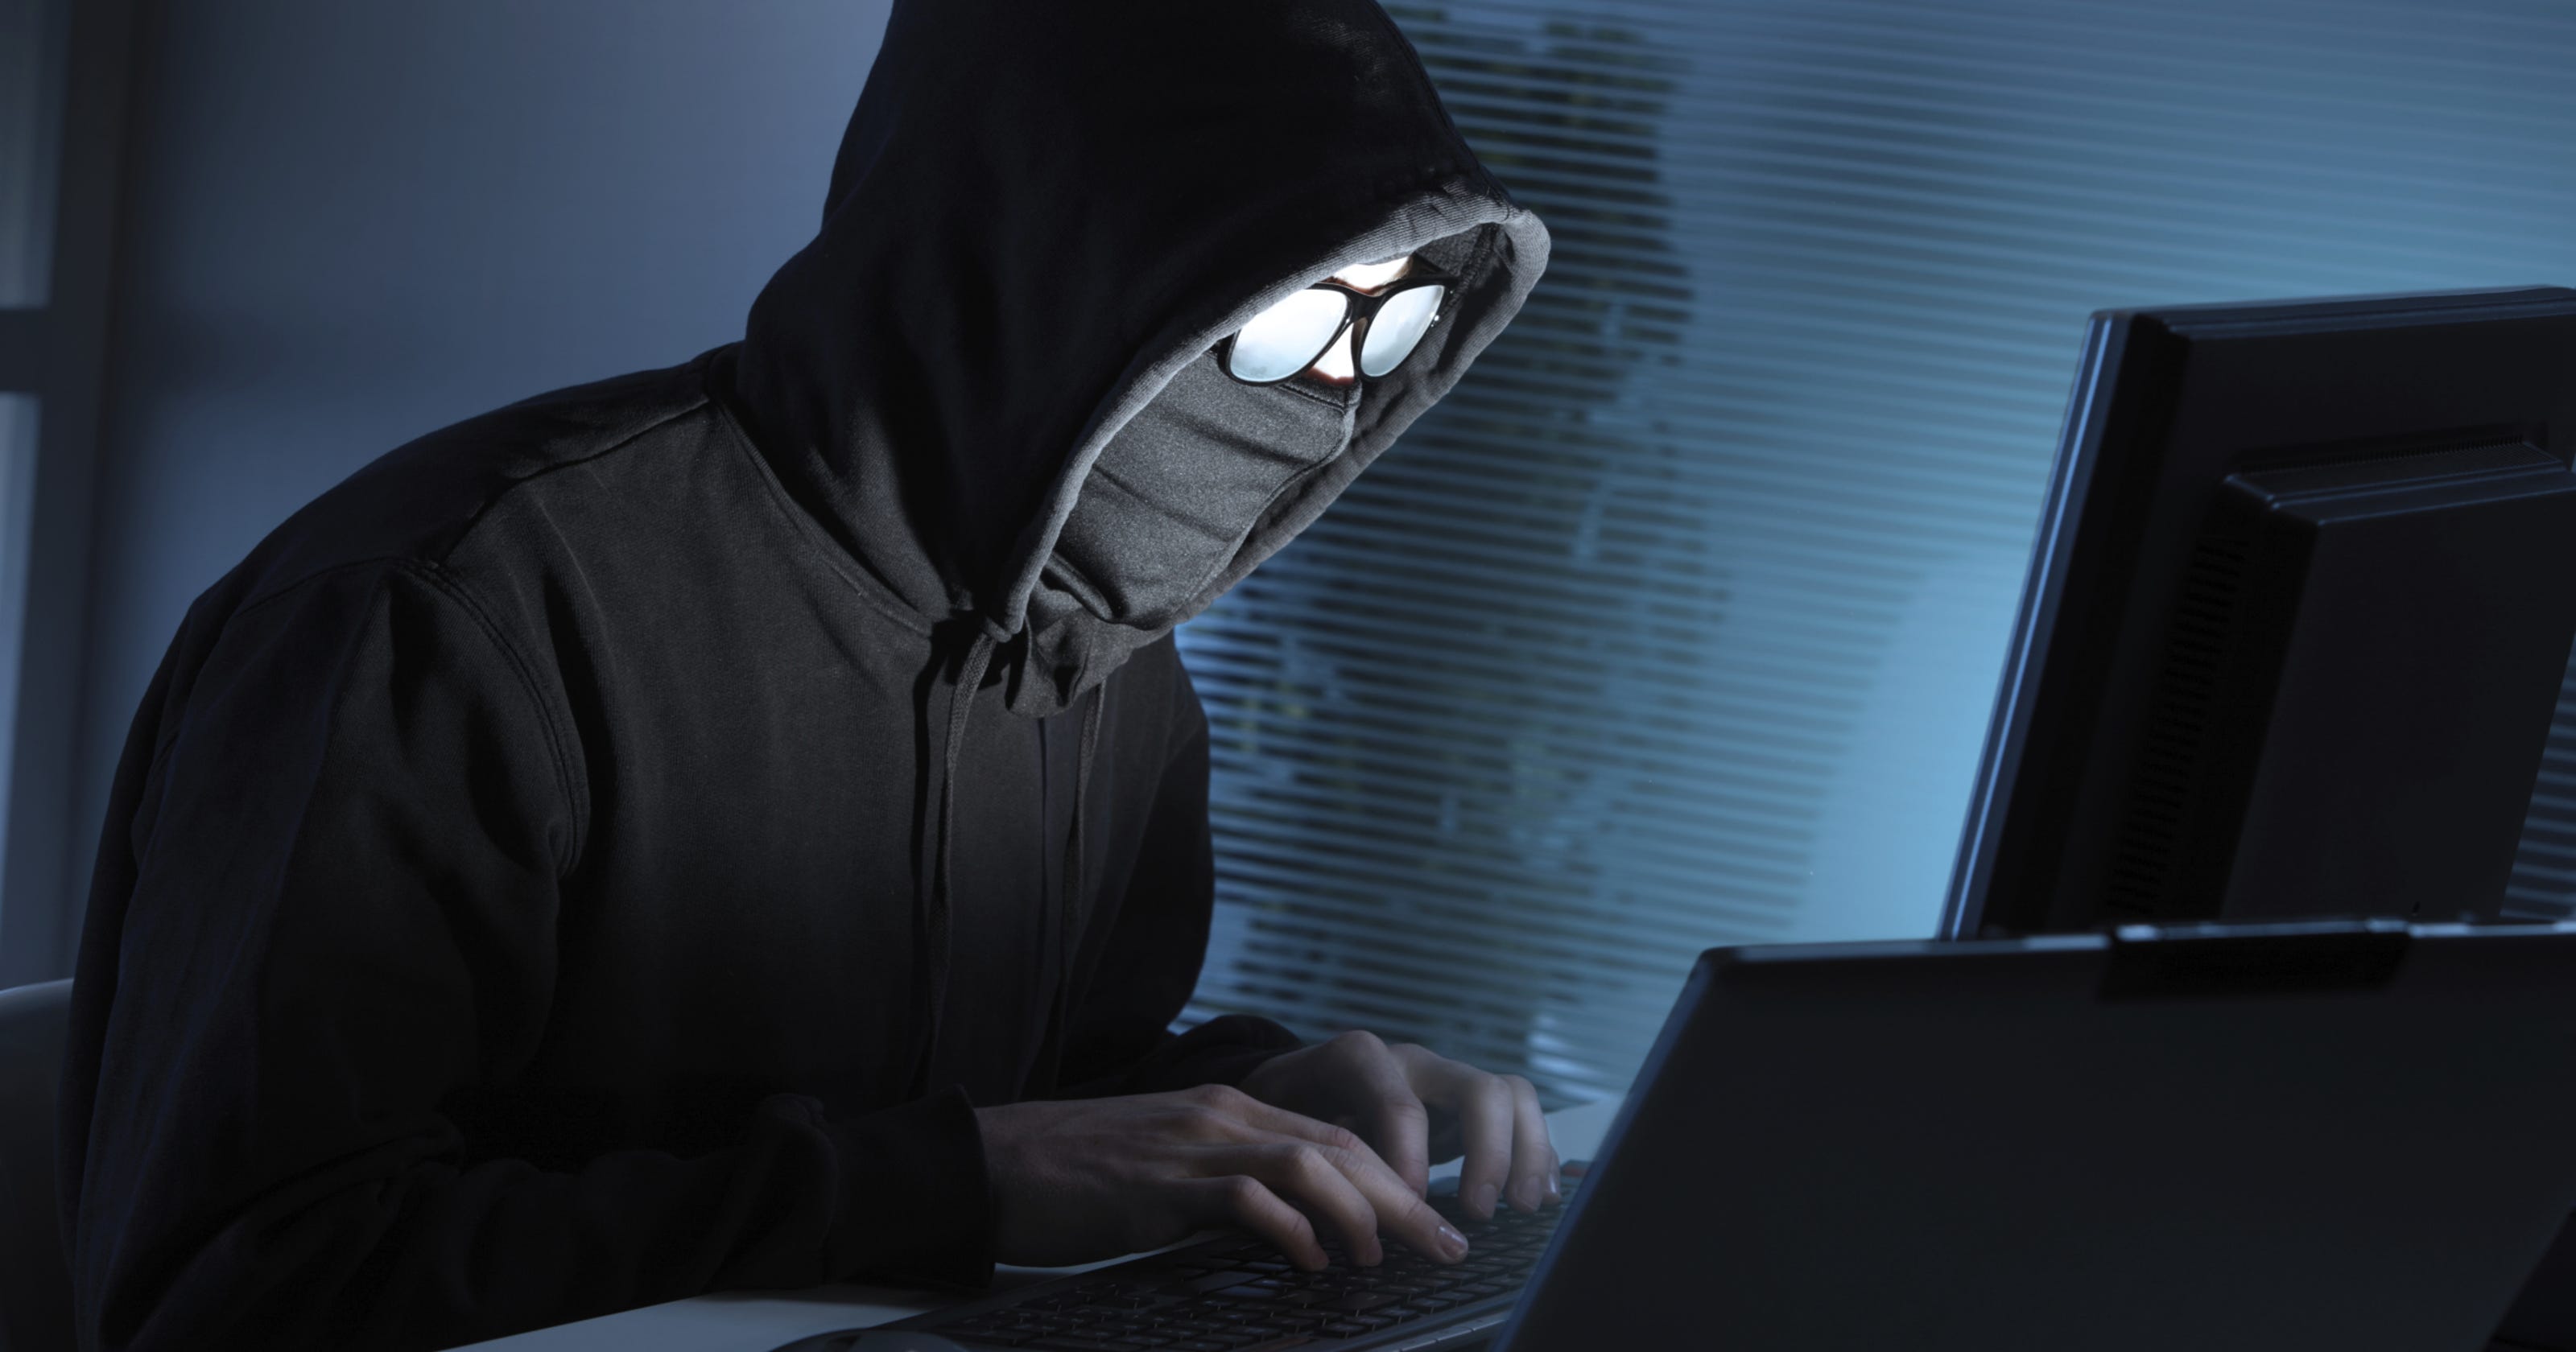 Protect yourself from cyber hackers, modern day pirates